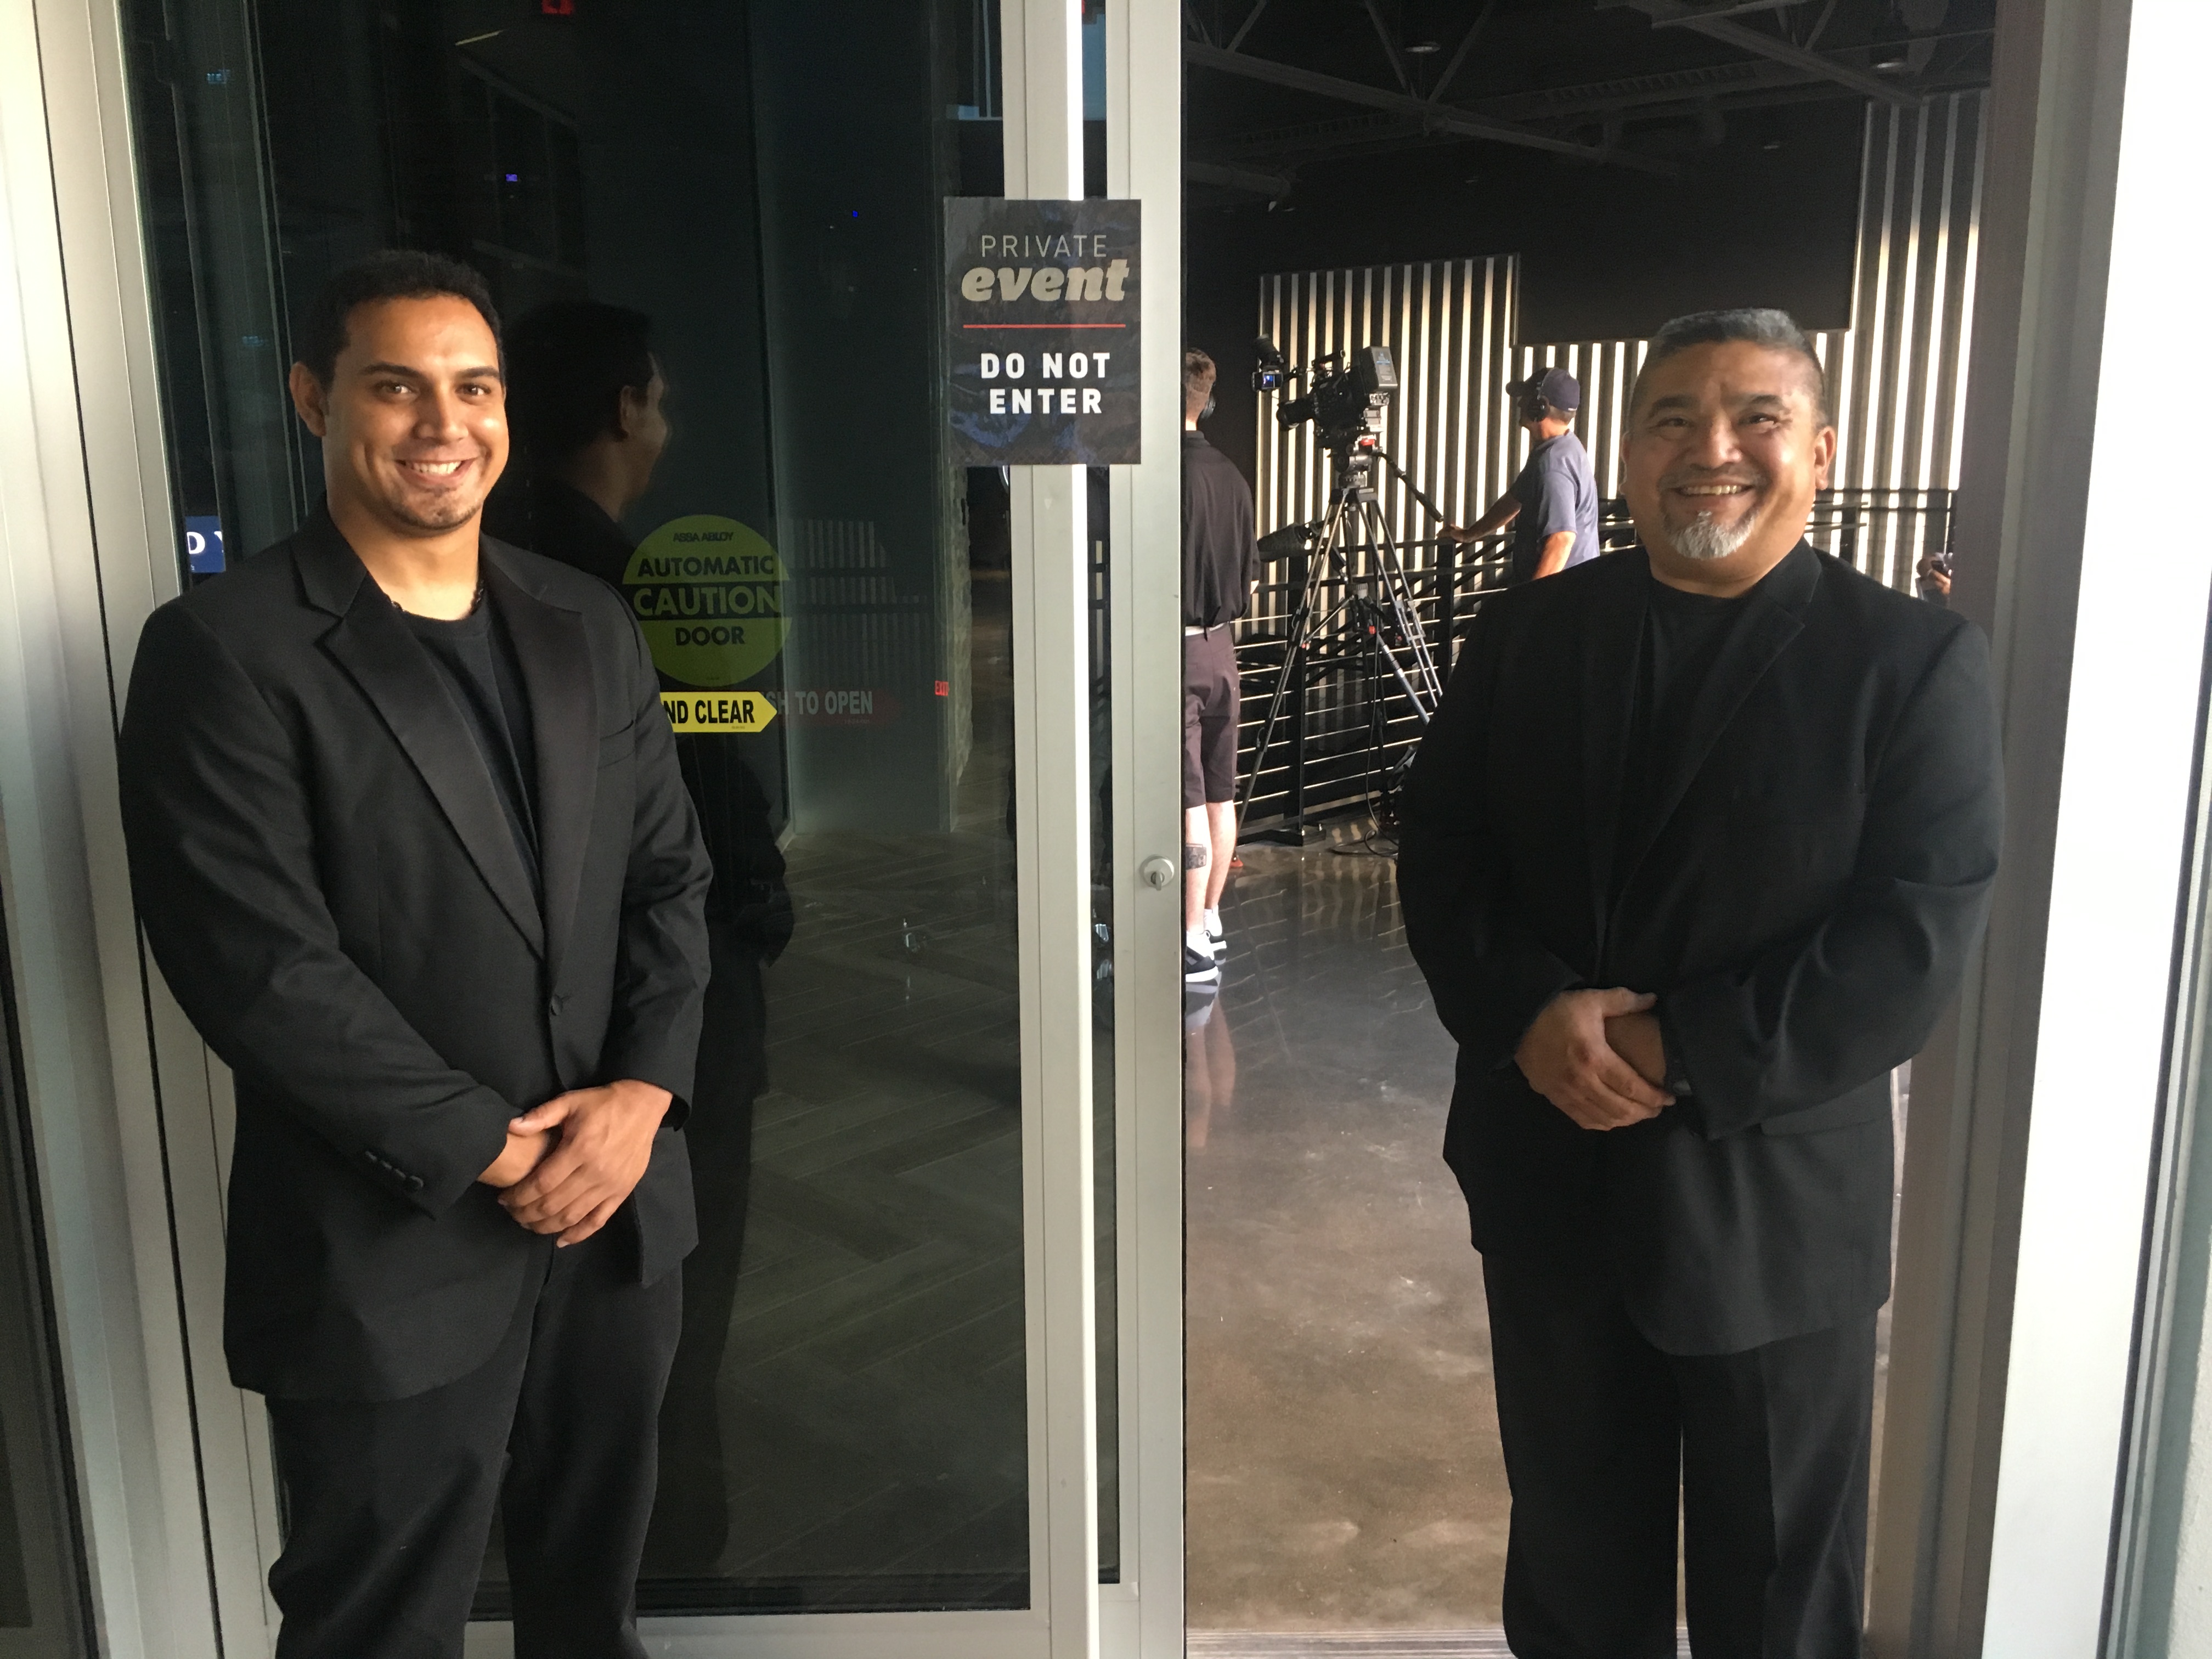 Two guards outside a private corporate event.